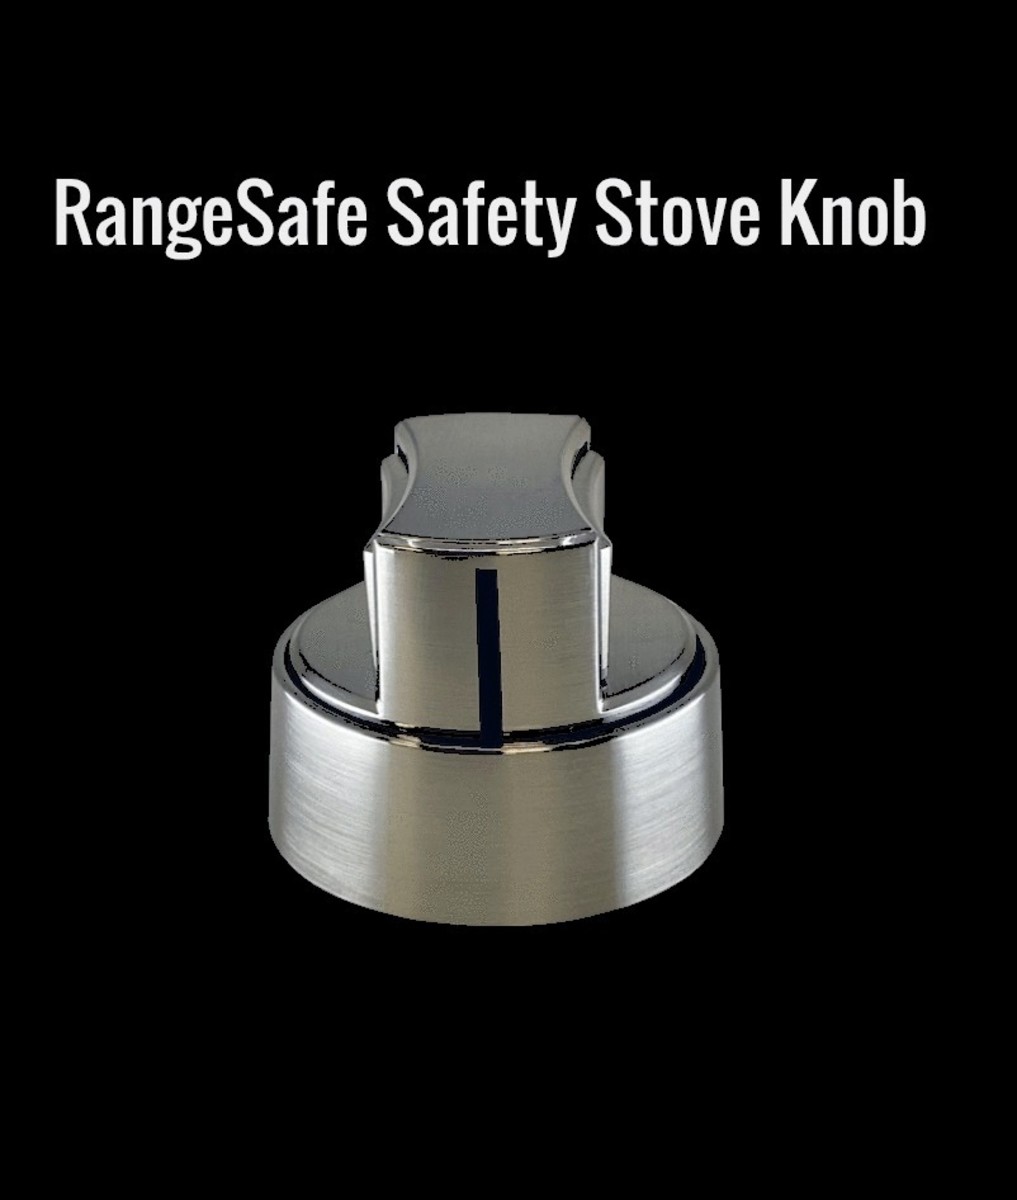 Long Handle Stove Knob Turning Aid : help reach and turn stove knobs